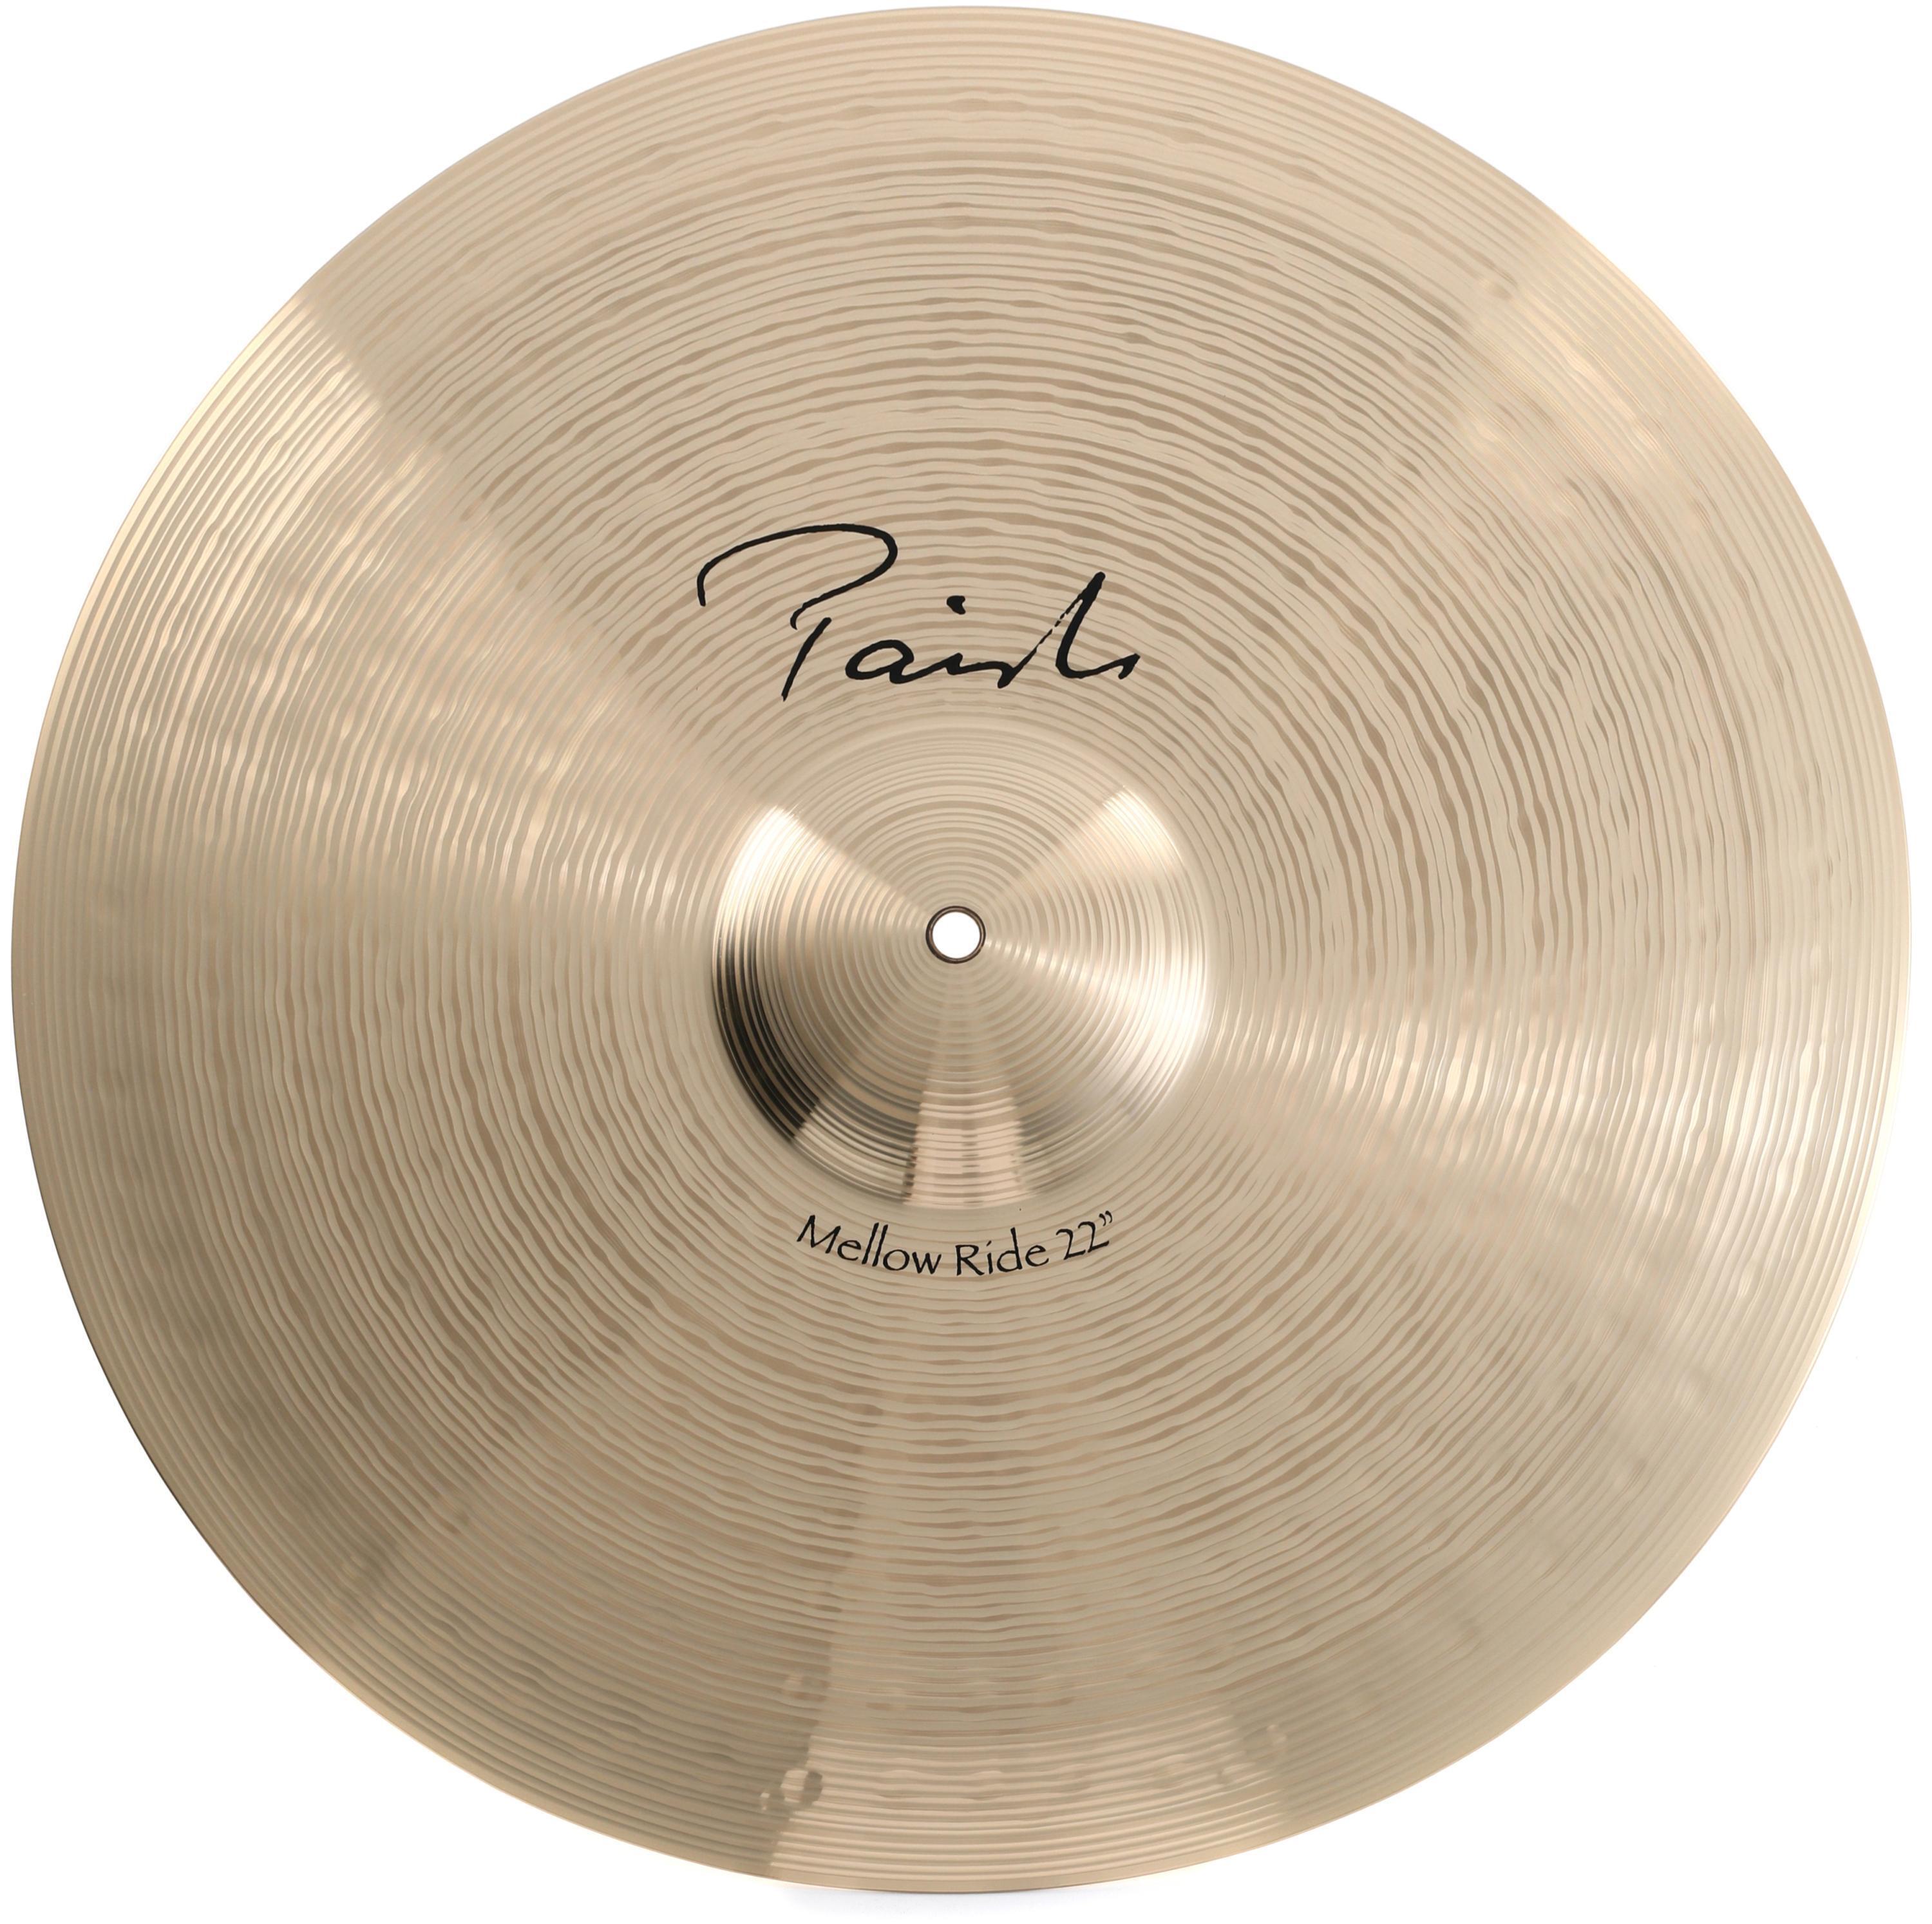 Paiste Signature Mellow Ride Cymbal - 22 inch